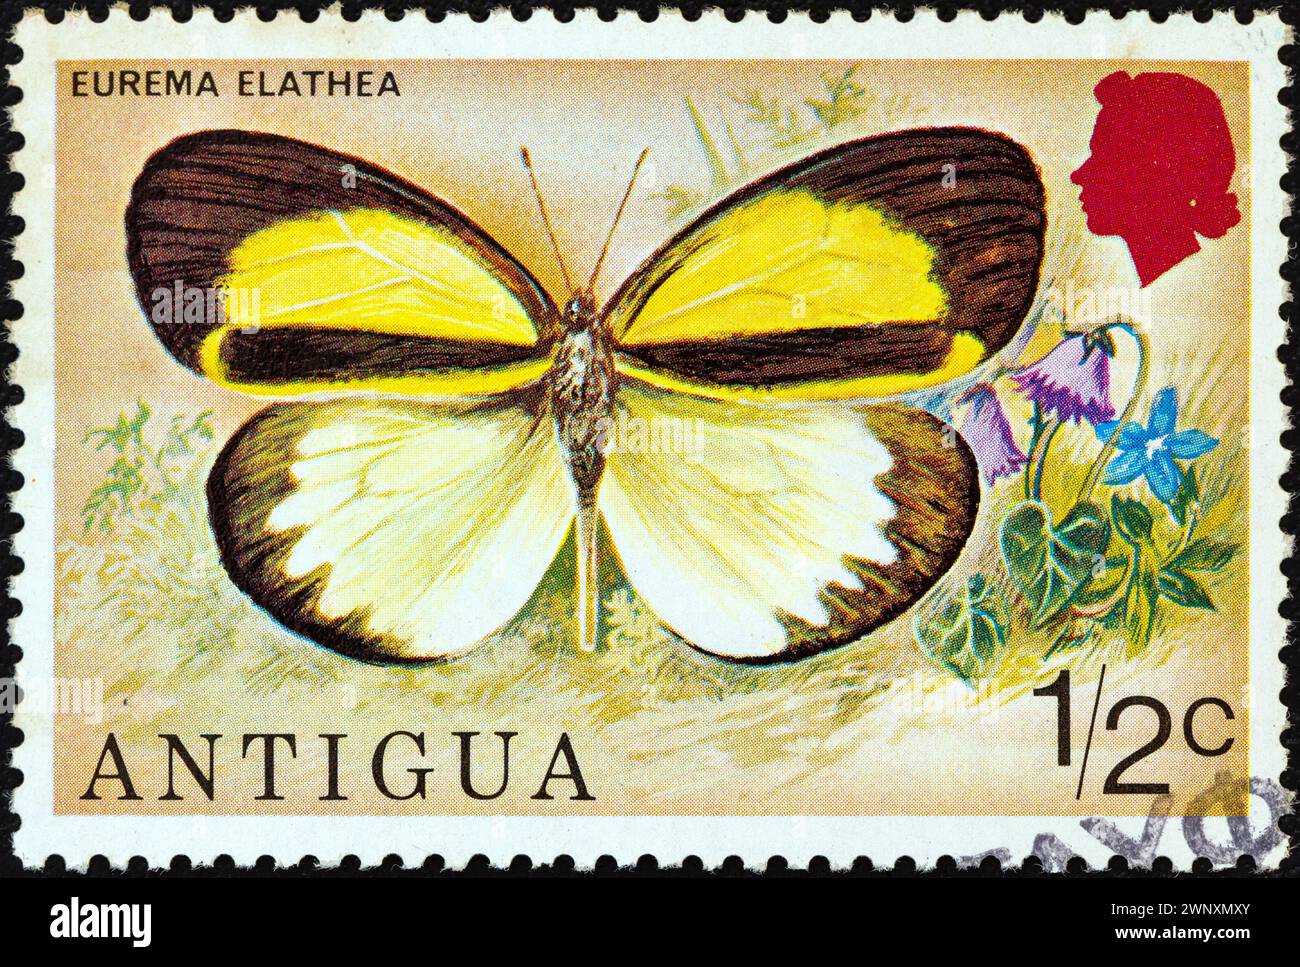 ANTIGUA - CIRCA 1975: A stamp printed in Antigua from the 'Butterflies' issue shows an Eurema elathea butterfly Stock Photo